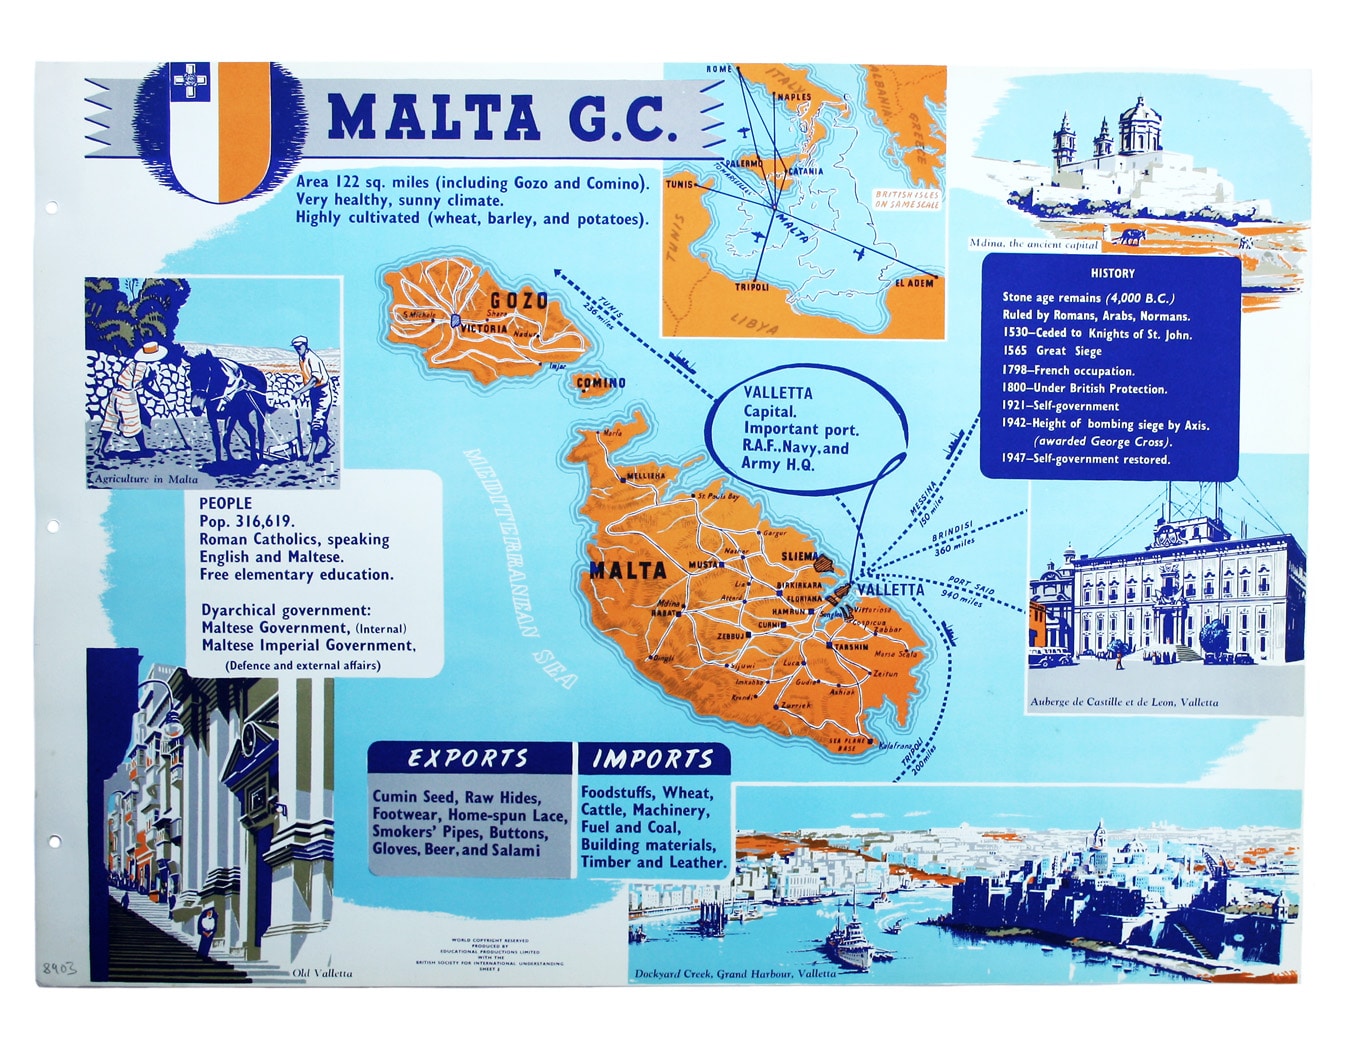 The Empire Information Project Map of Malta